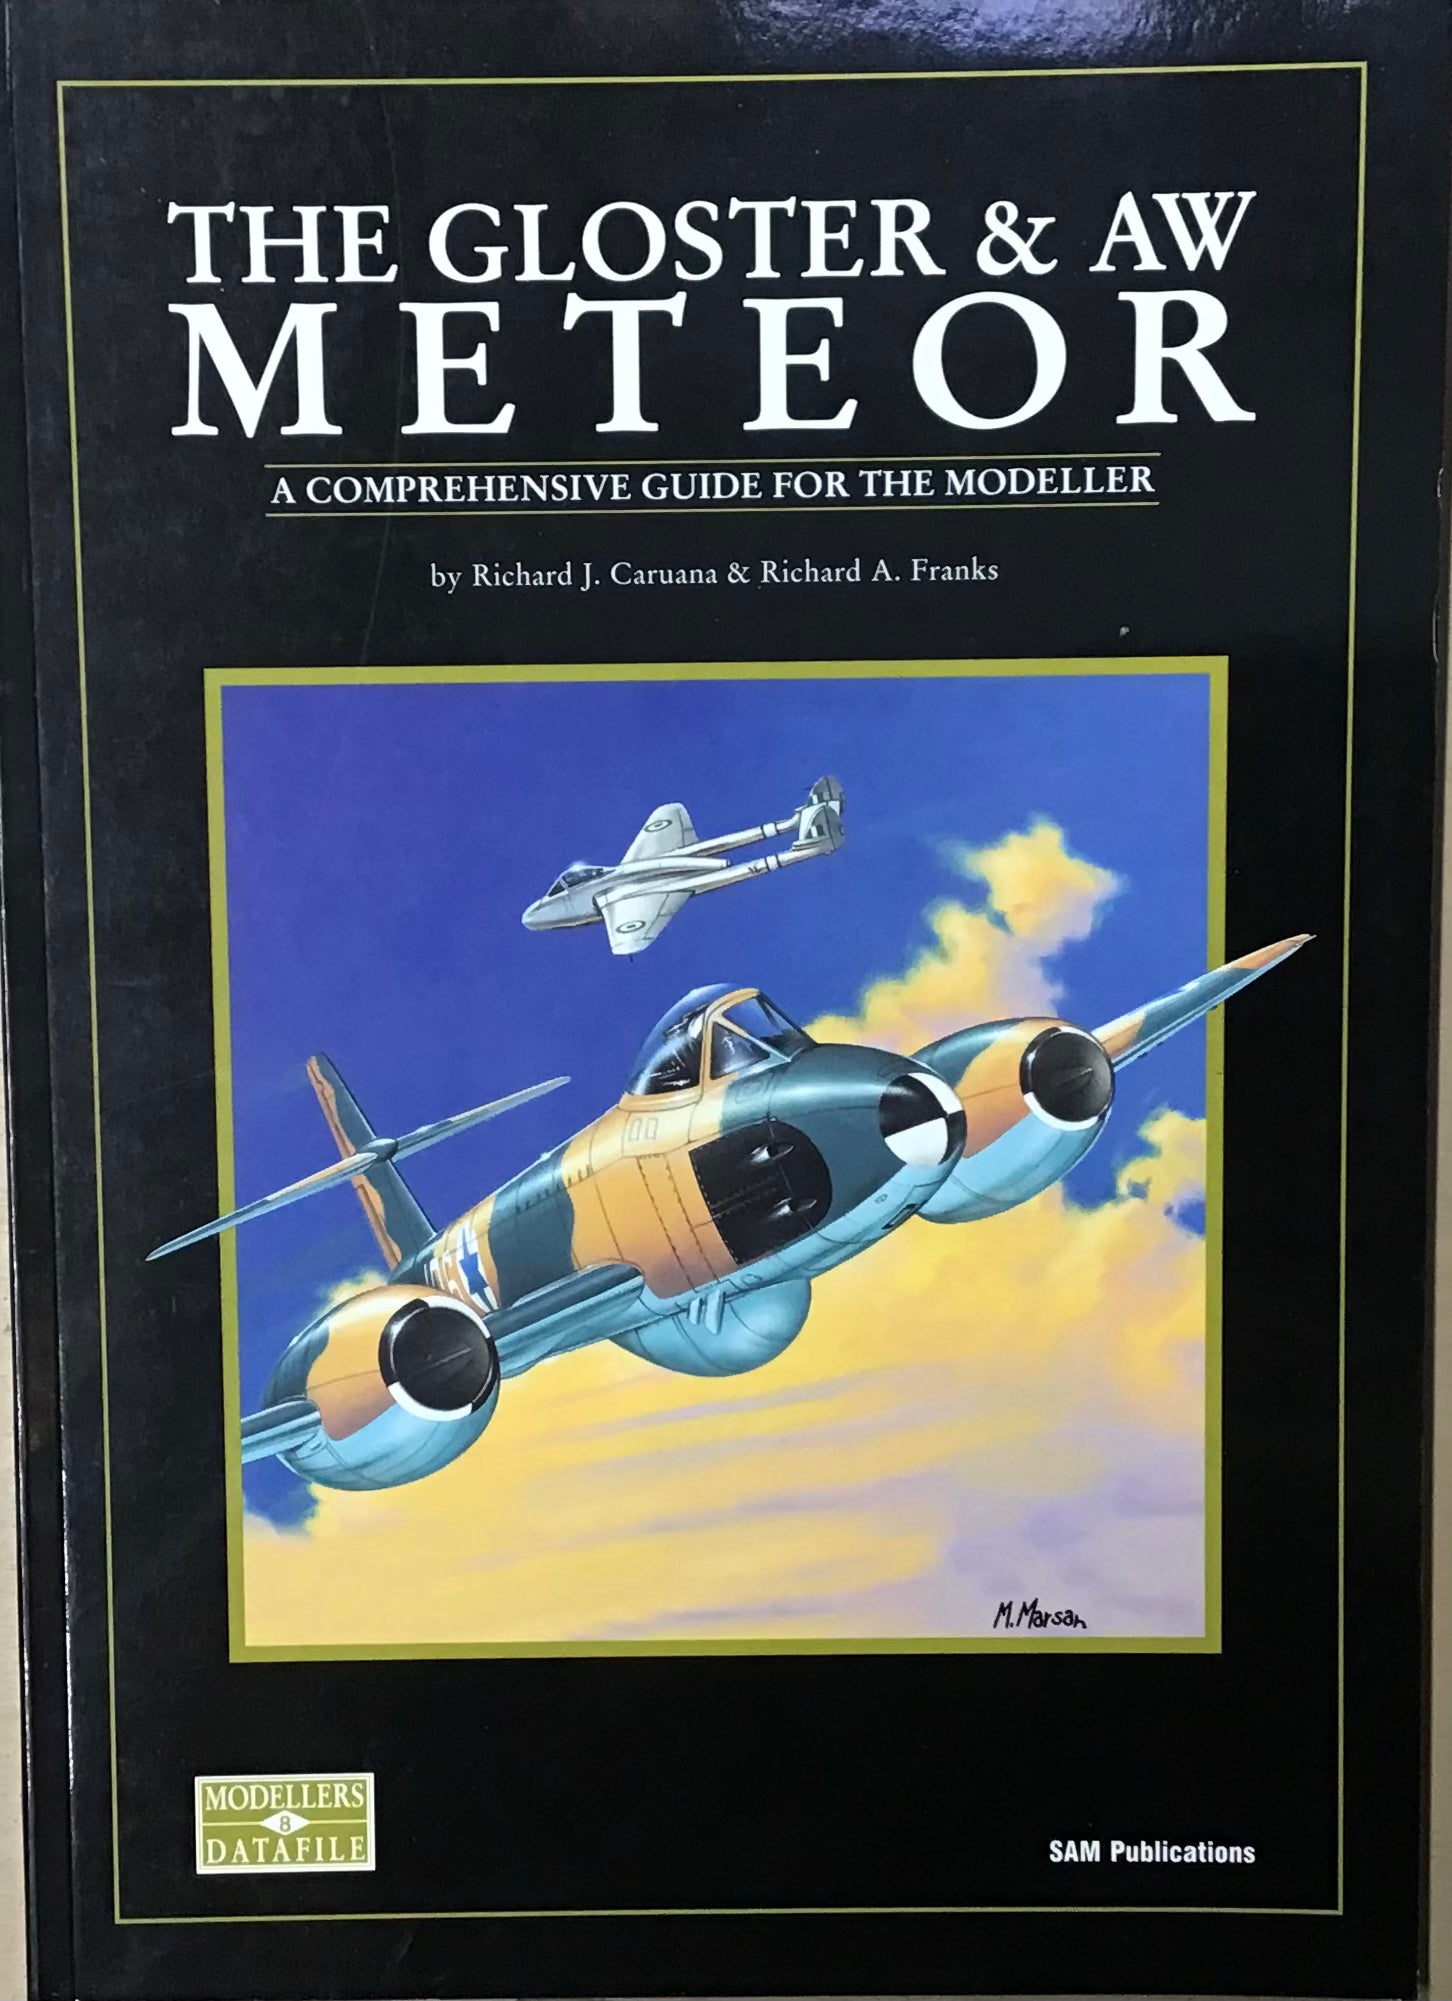 The Gloster & AW Meteor: A Comprehensive Guide for the Modeller - Richard J. Caruana & Richard A. Franks - Chester Model Centre